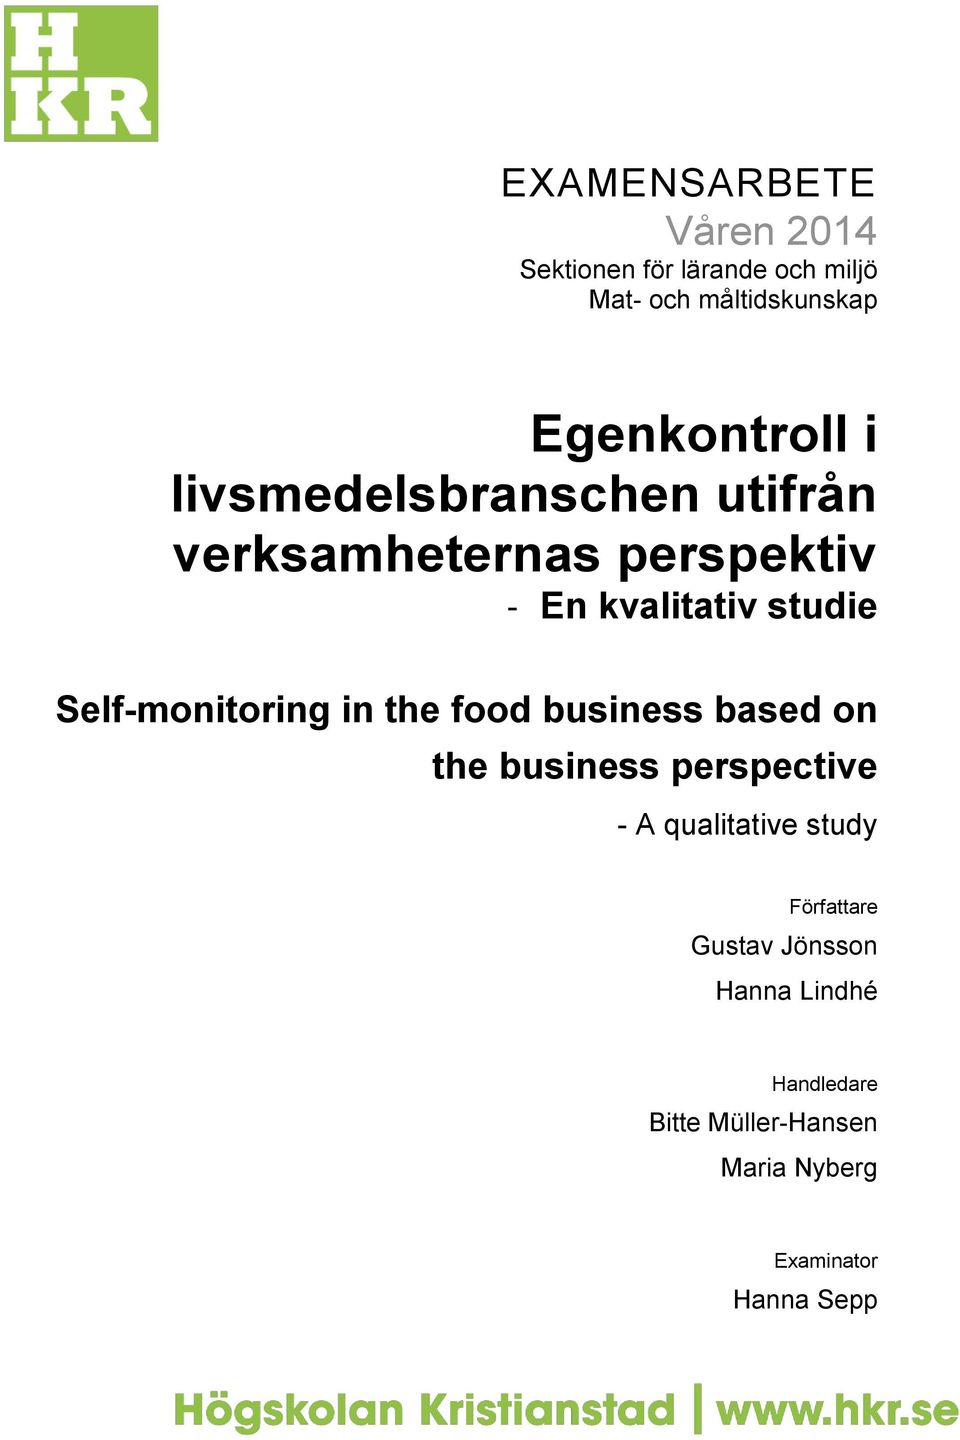 Self-monitoring in the food business based on the business perspective - A qualitative study